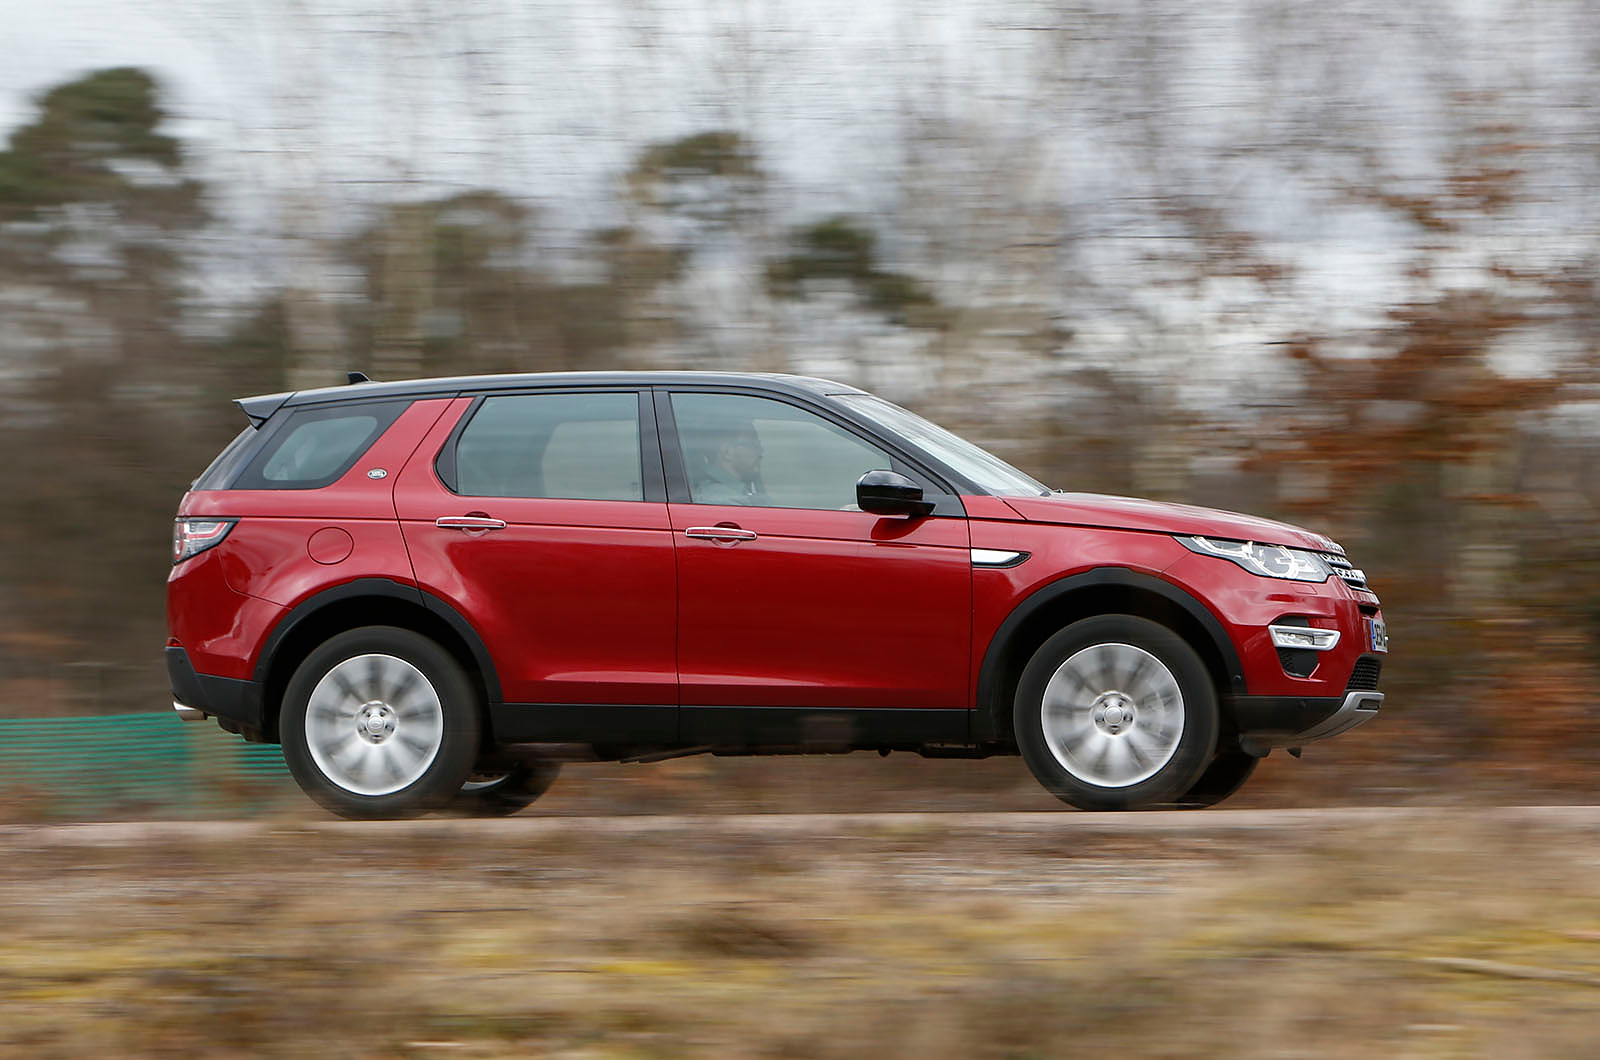 The Land Rover Discovery Sport can be driven briskly